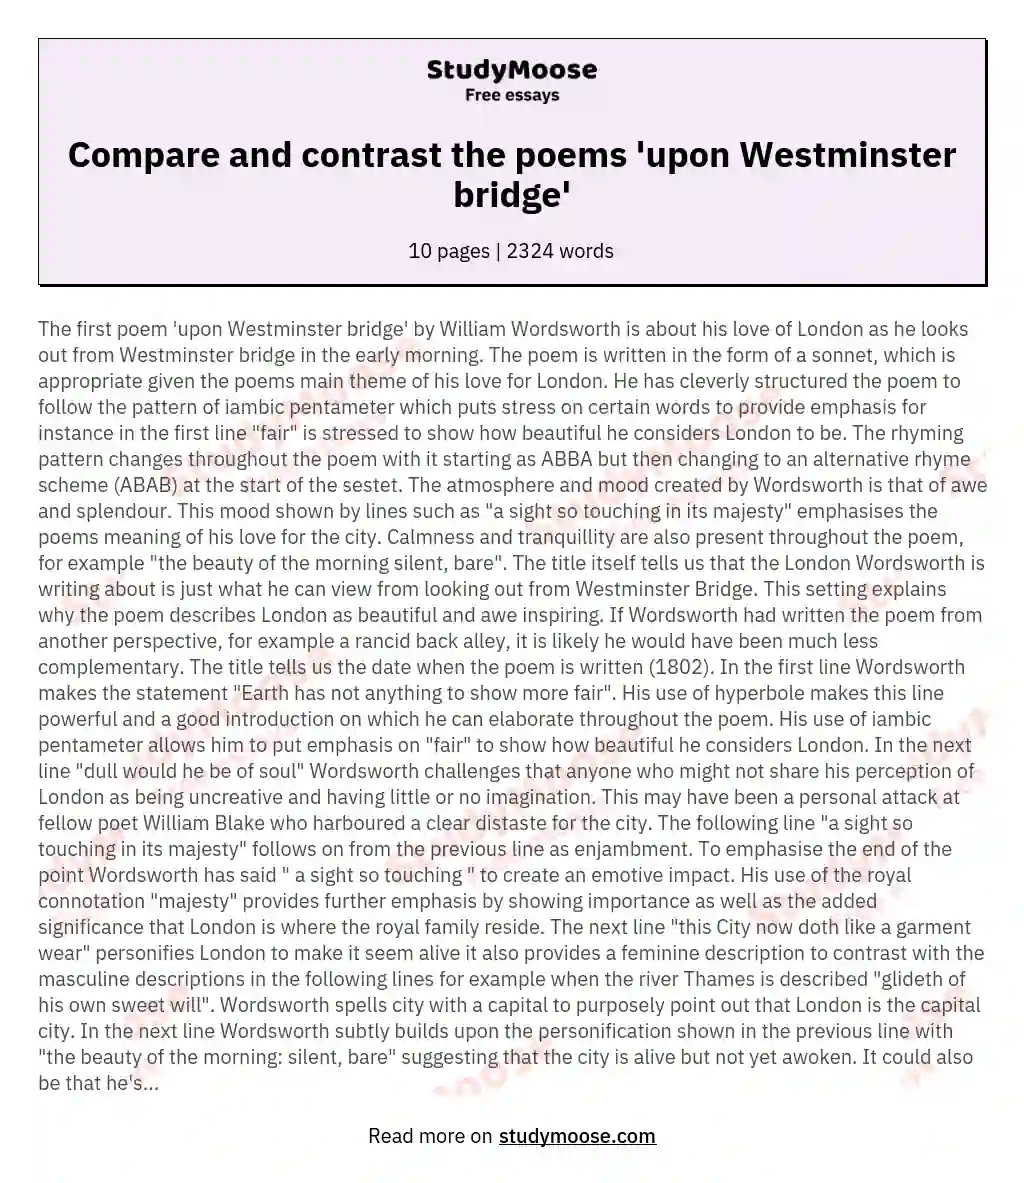 Compare and contrast the poems 'upon Westminster bridge' essay